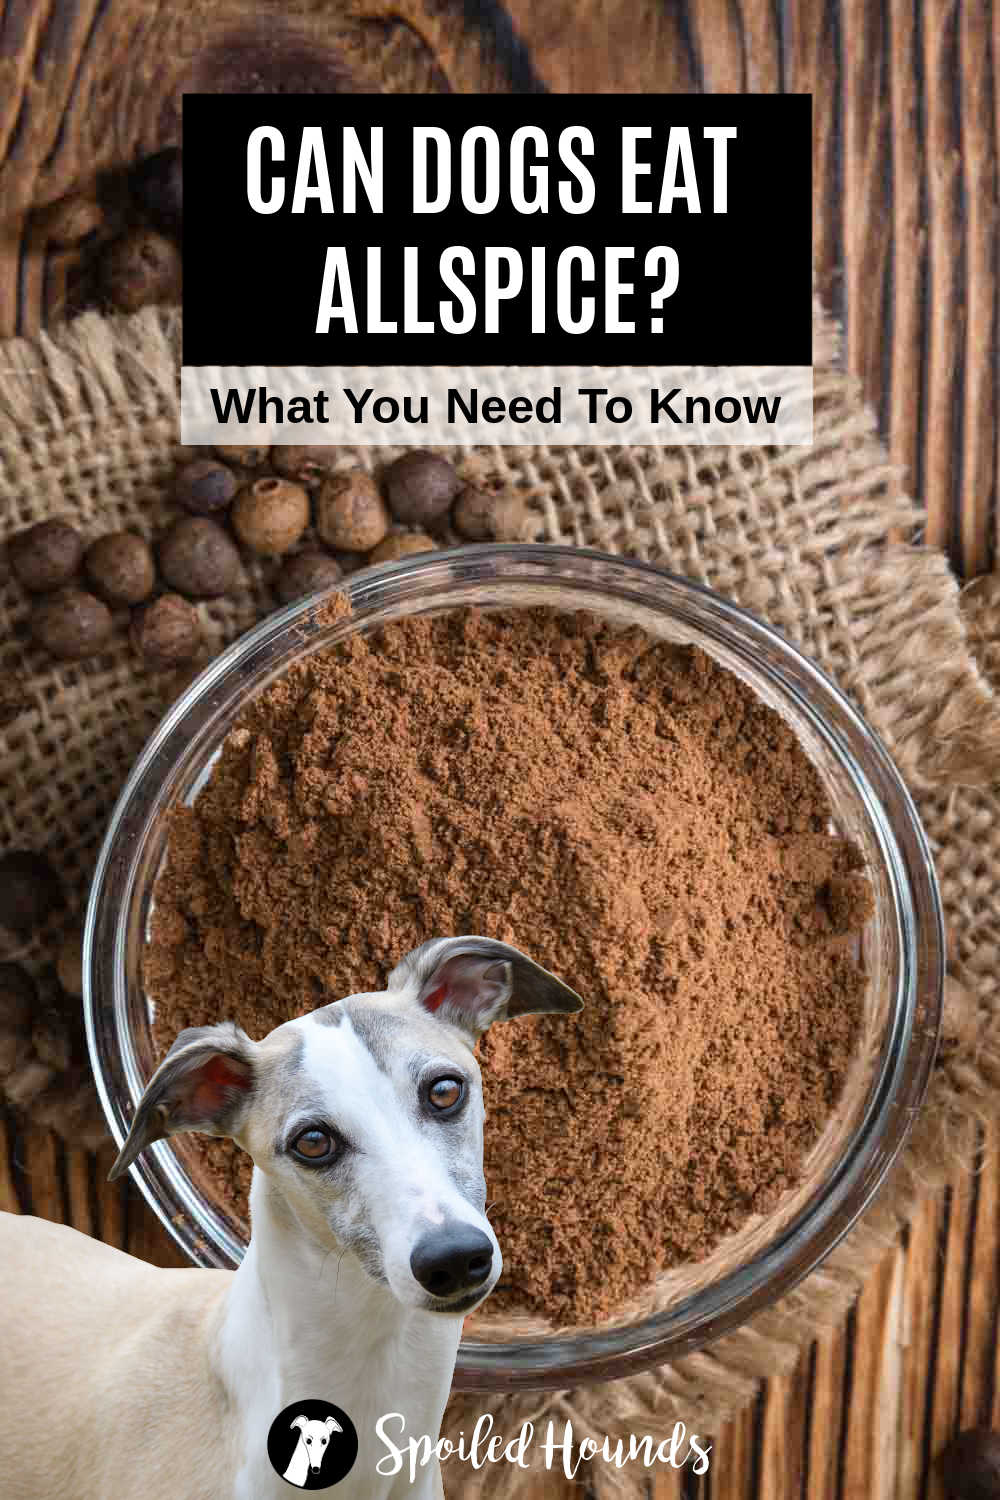 Whippet dog in front of a bowl of ground allspice.